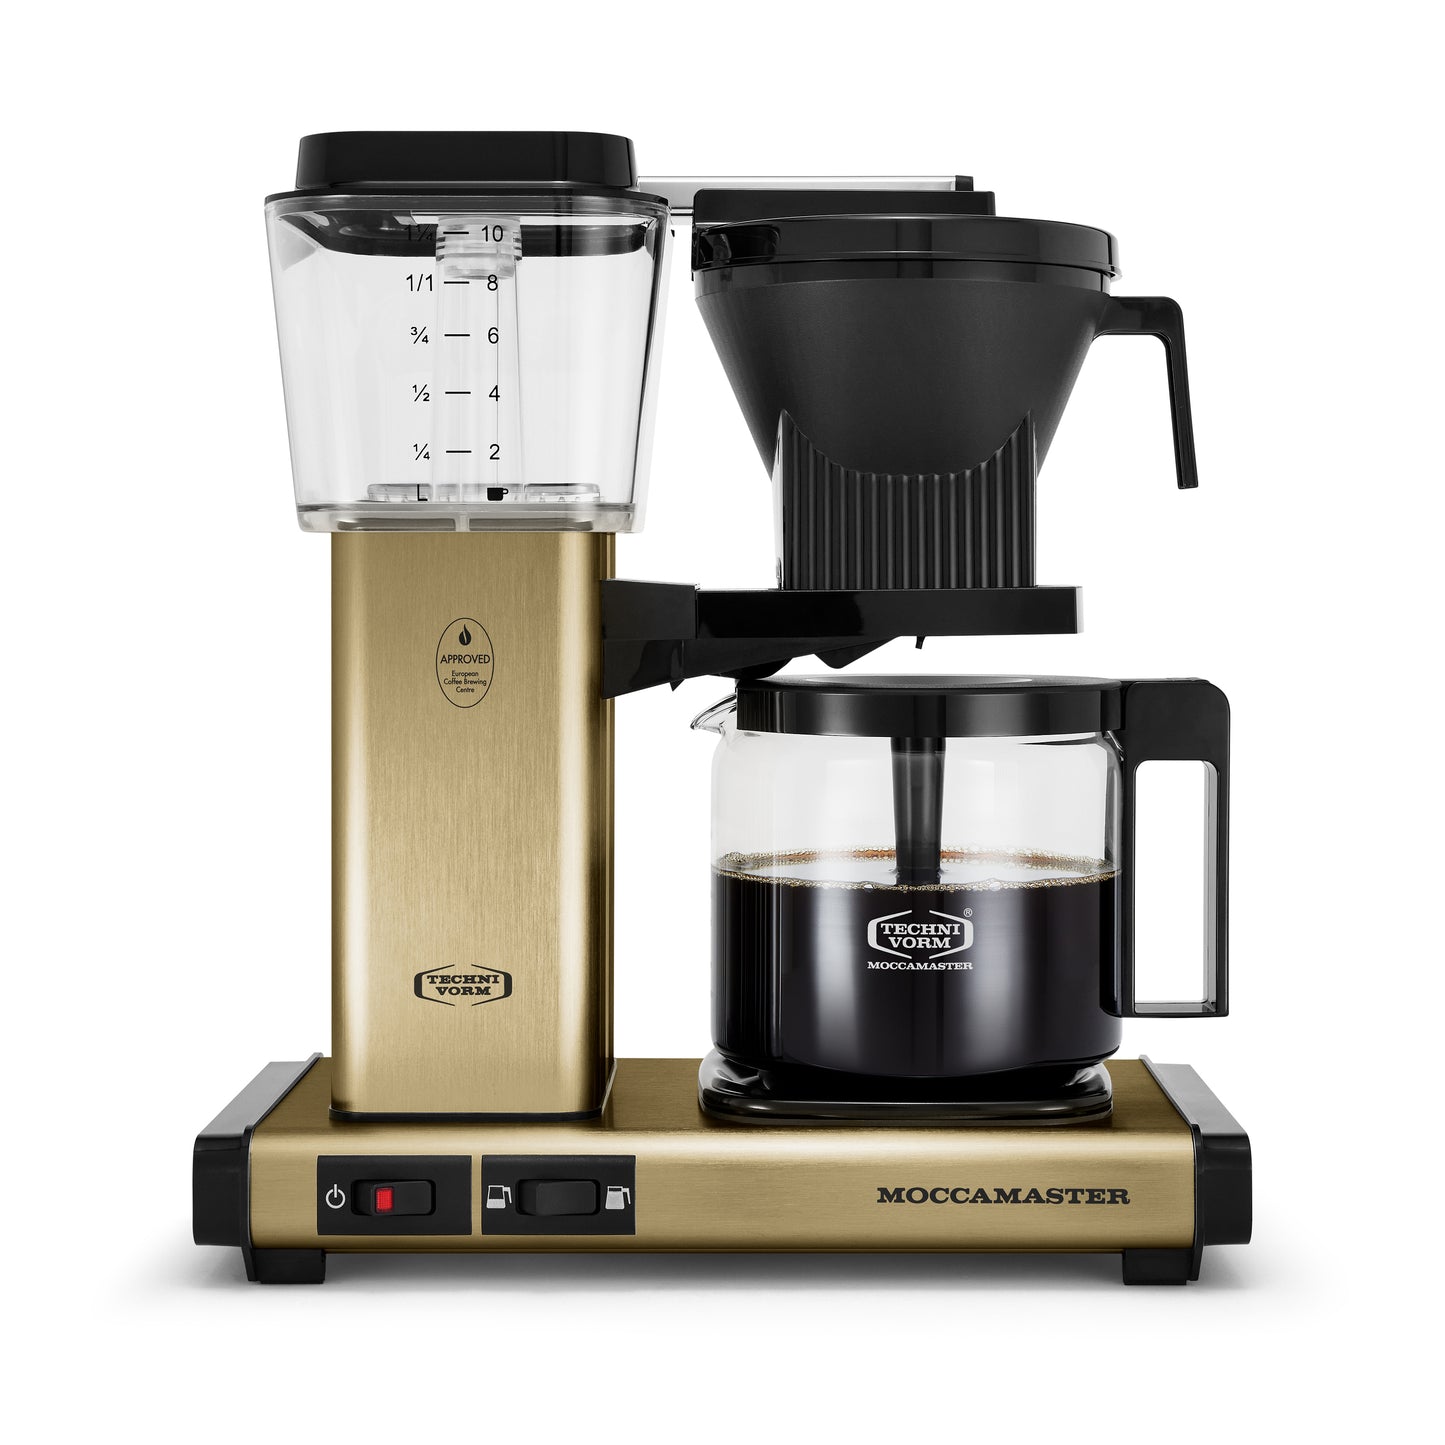 Brew Better Coffee at Home with the Moccamaster Electric Brewer